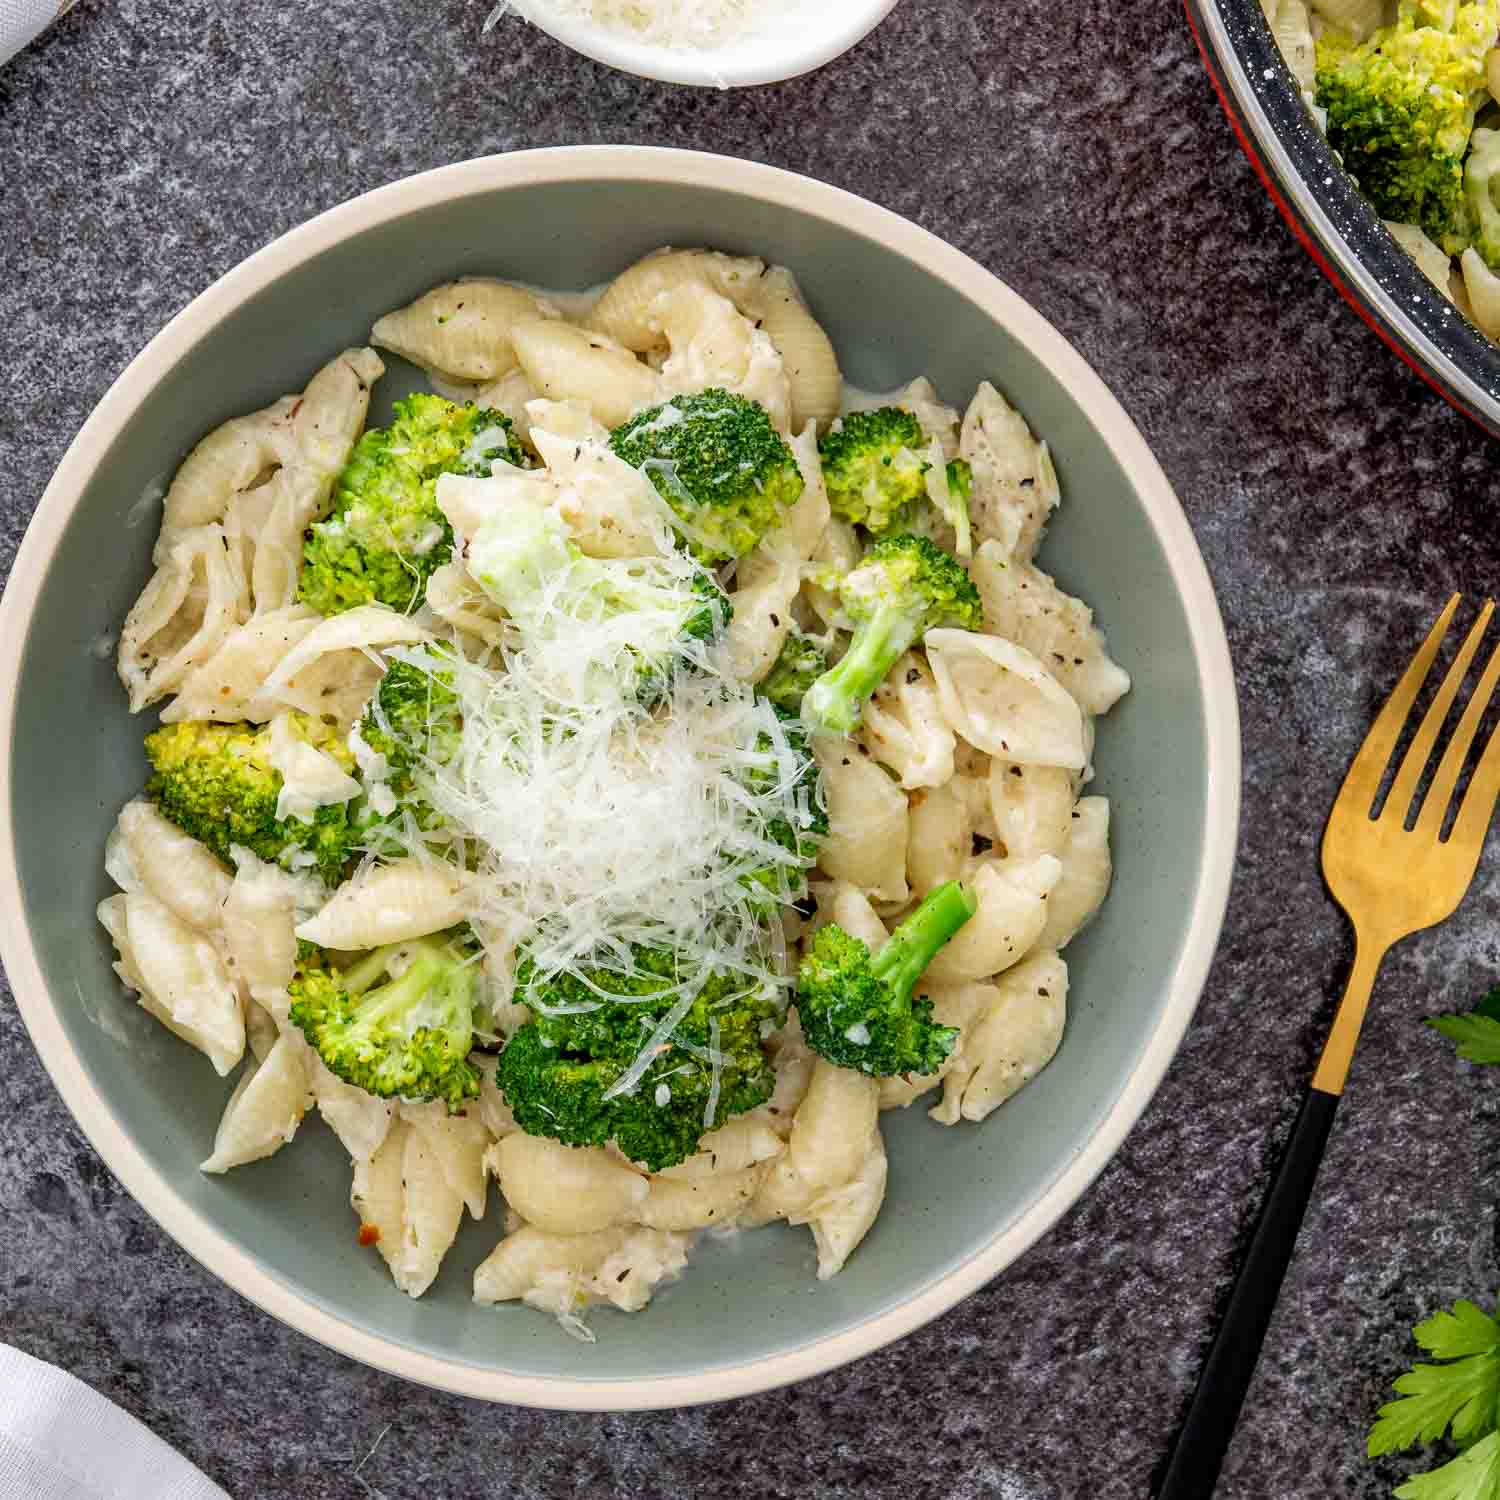 a serving of creamy broccoli pasta in a bowl garnished with parmesan cheese.